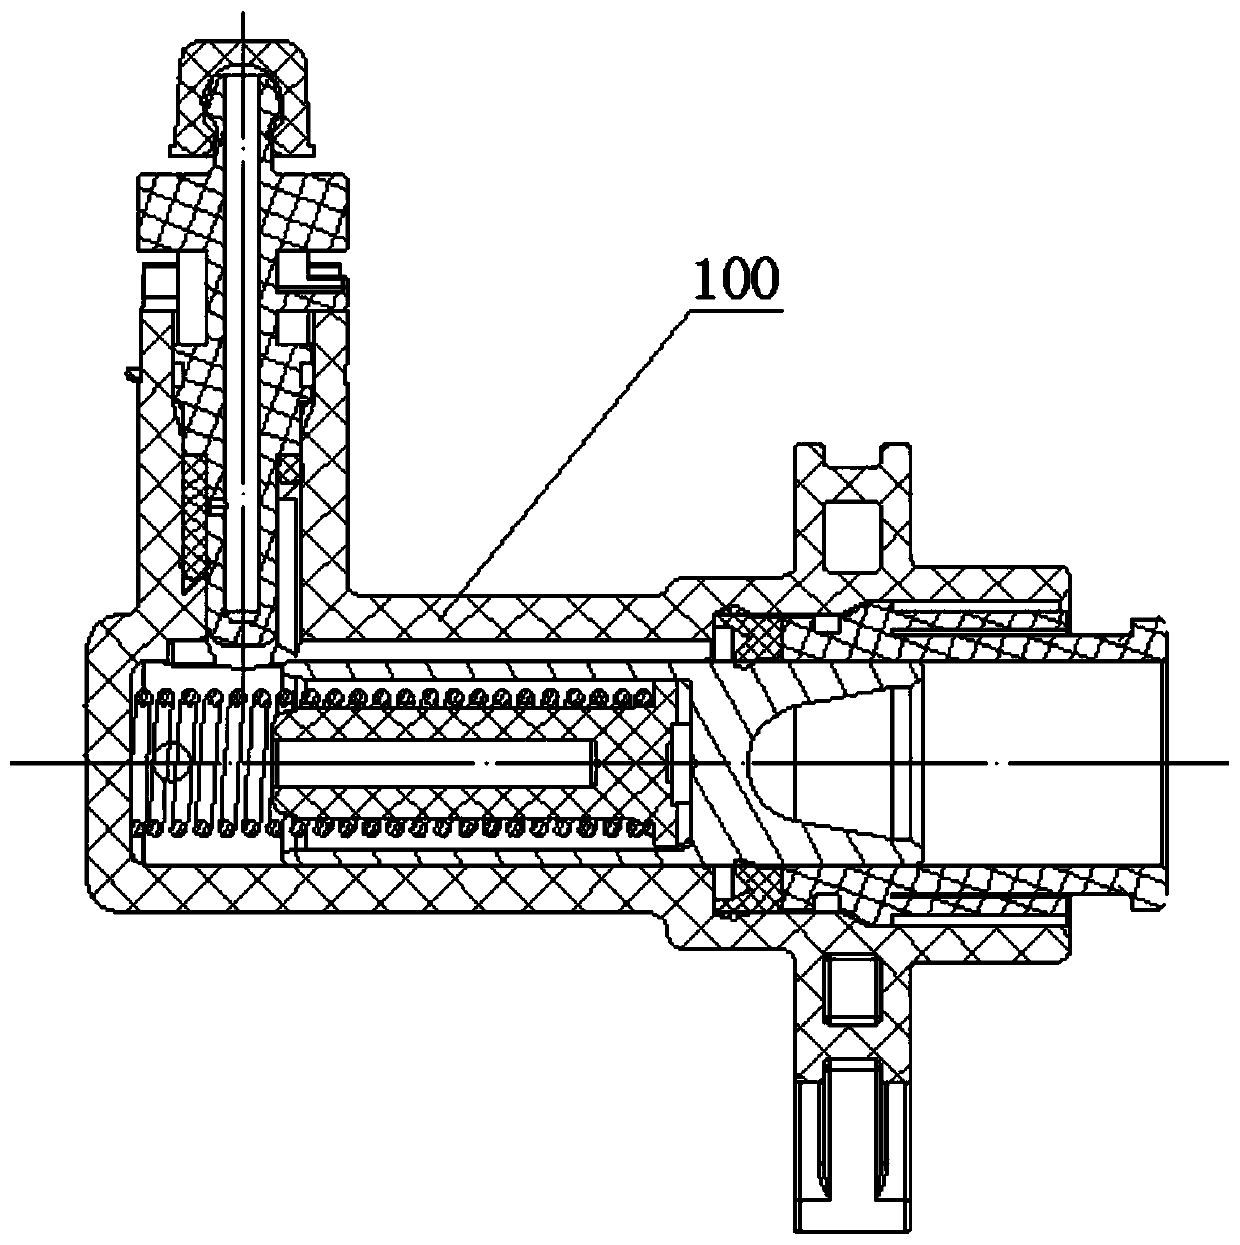 Clutch working cylinder shield and cylinder block assembly press fitting and detection device